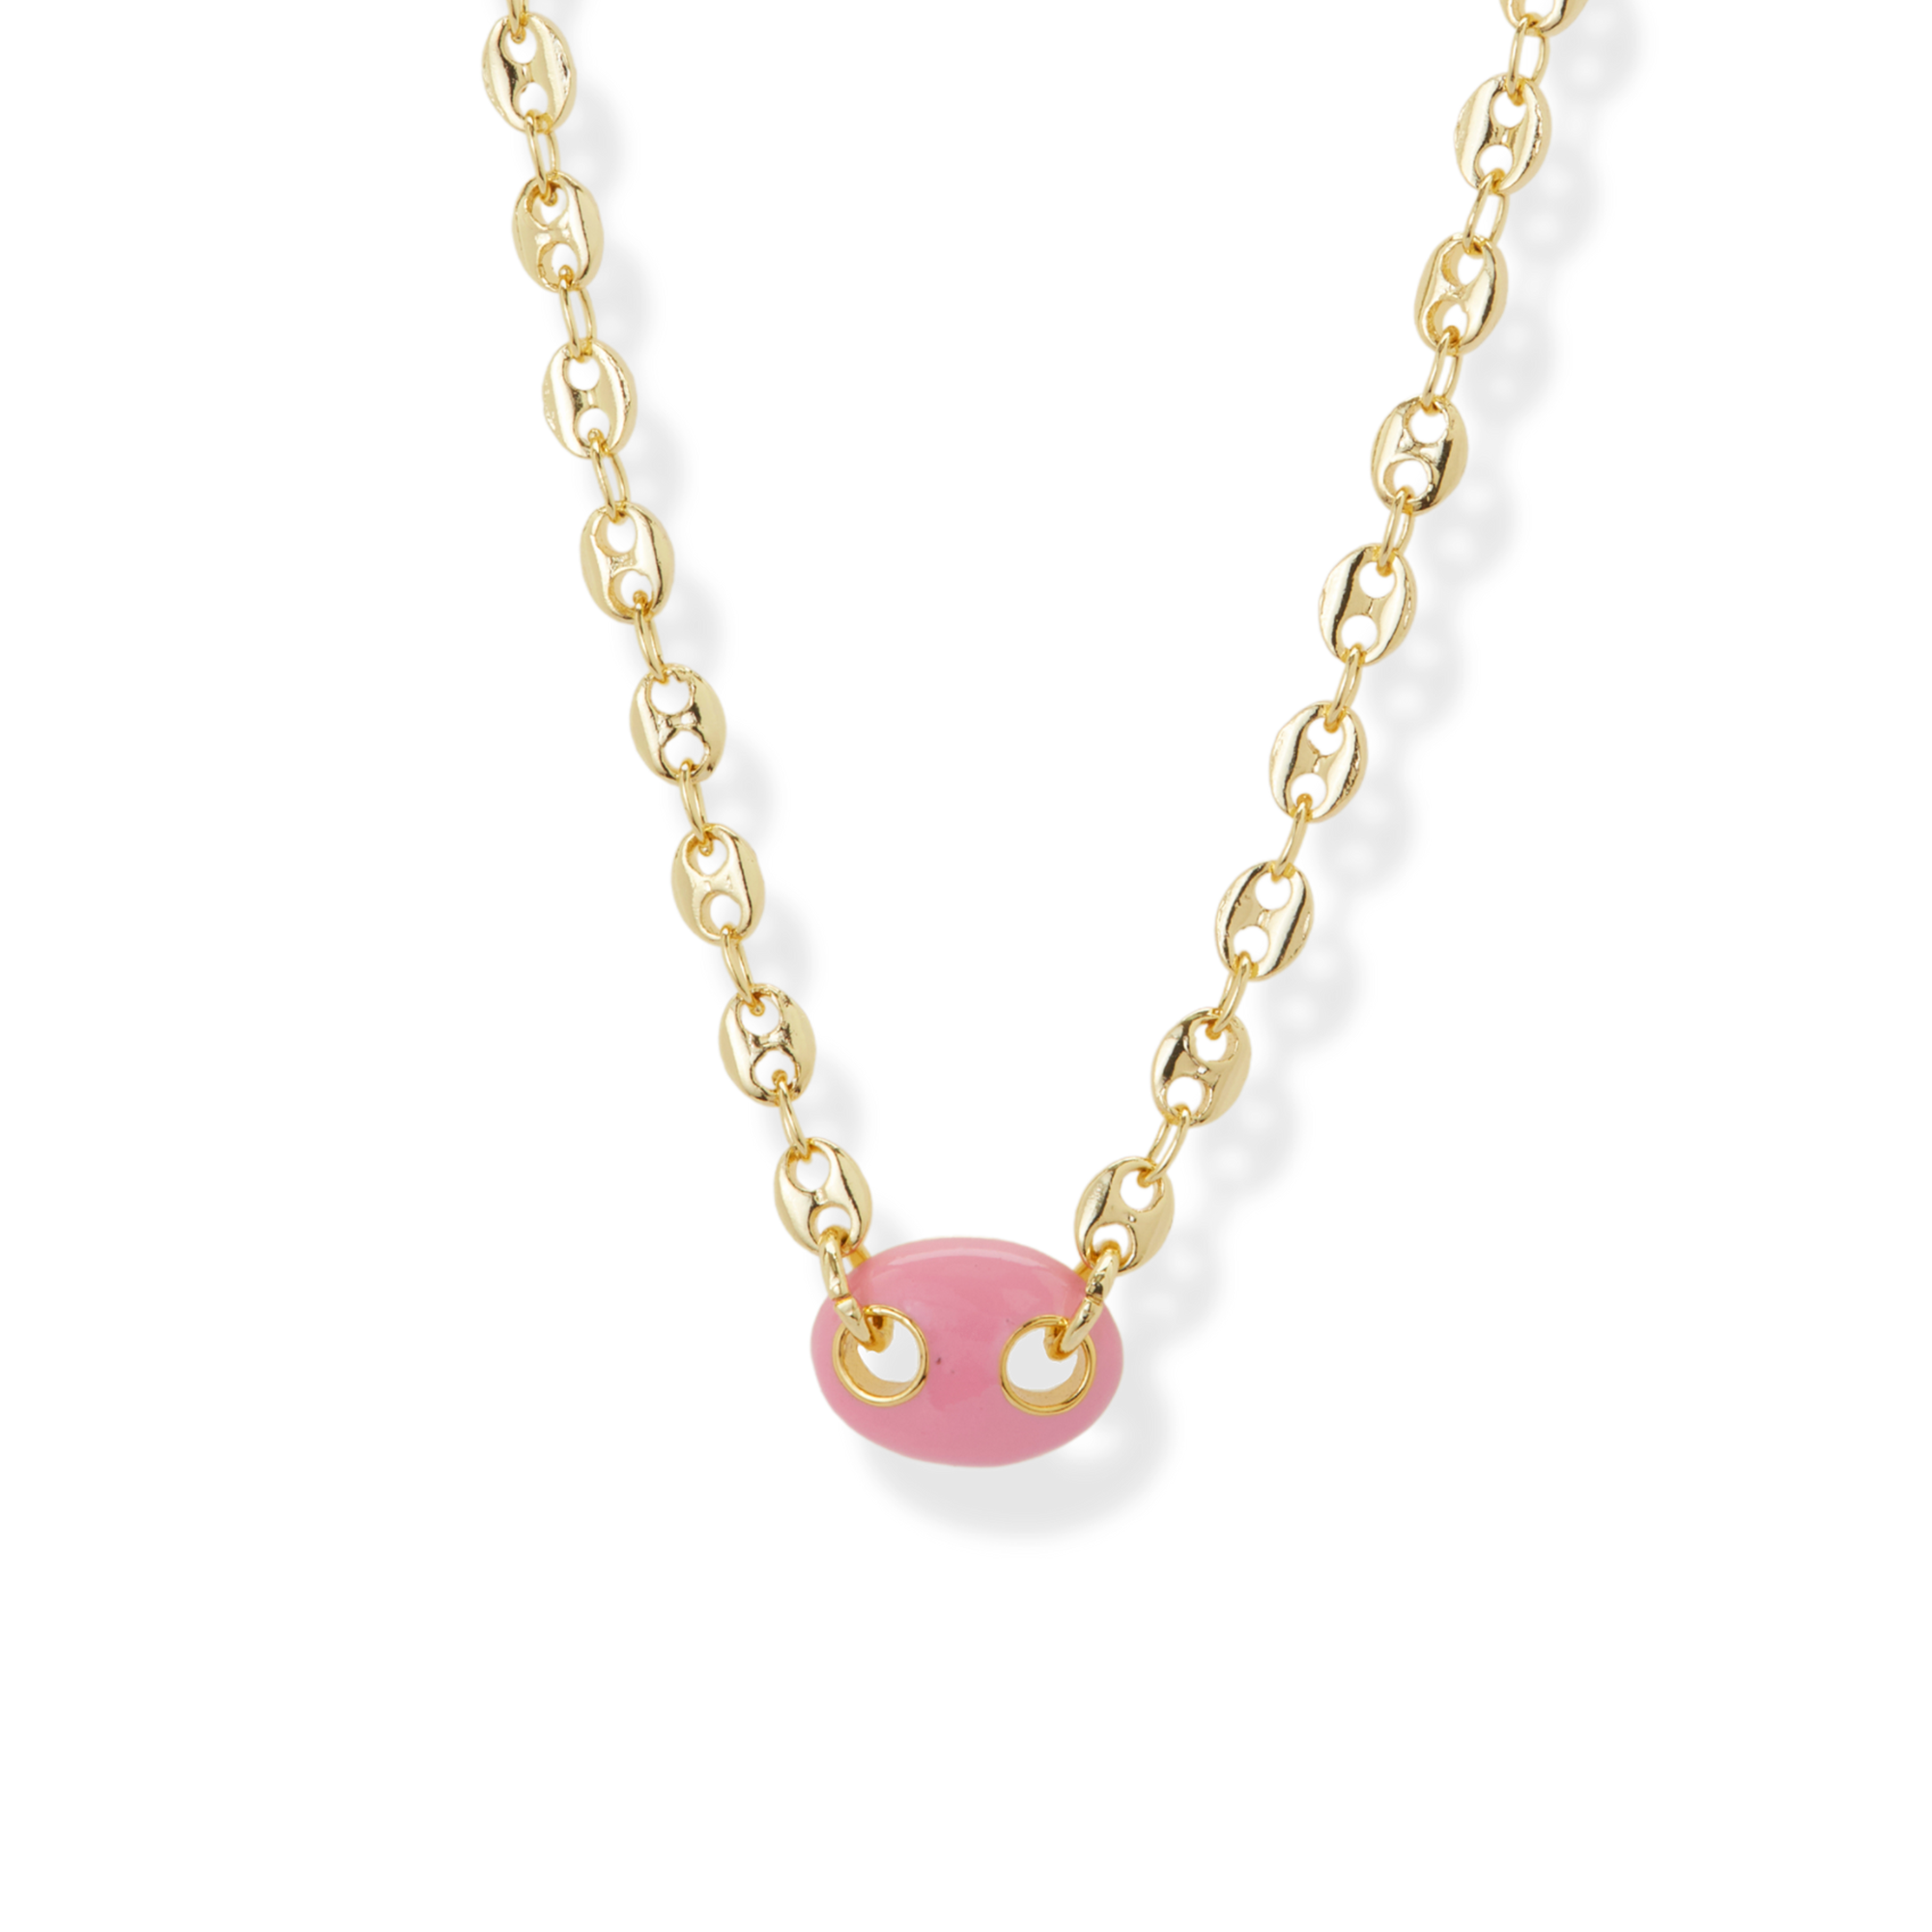 THE PINK ENAMEL MARINER CHAIN NECKLACE